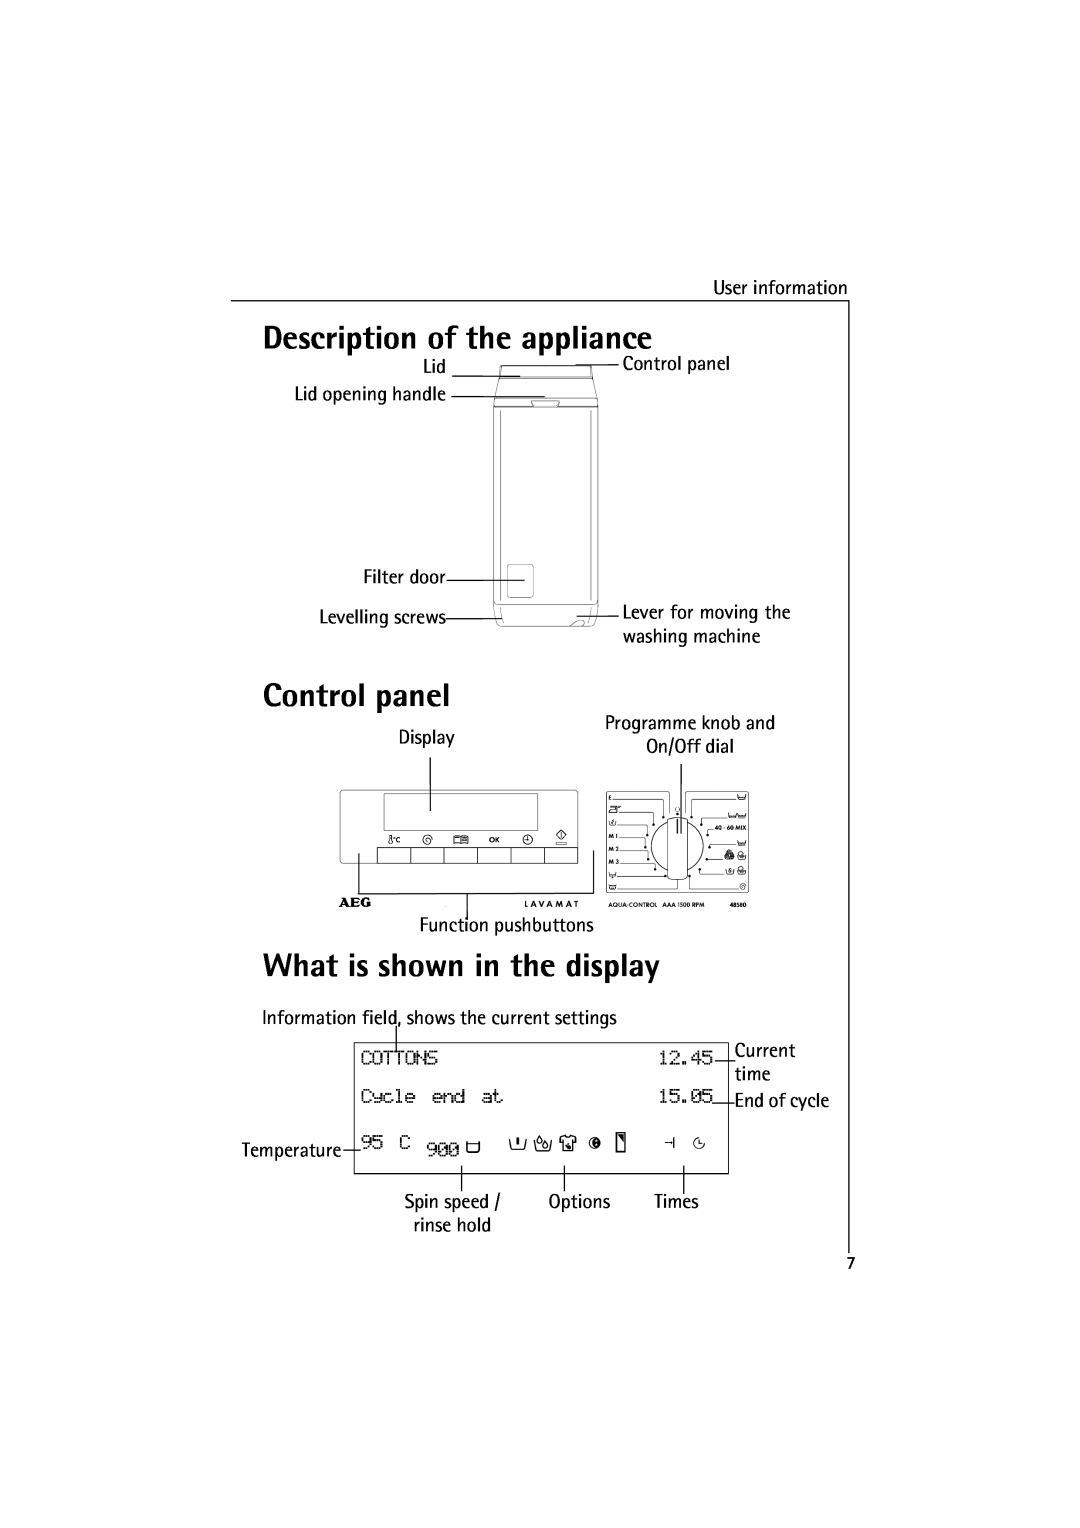 AEG 48380 manual Description of the appliance, Control panel, What is shown in the display, Lid opening handle, Filter door 